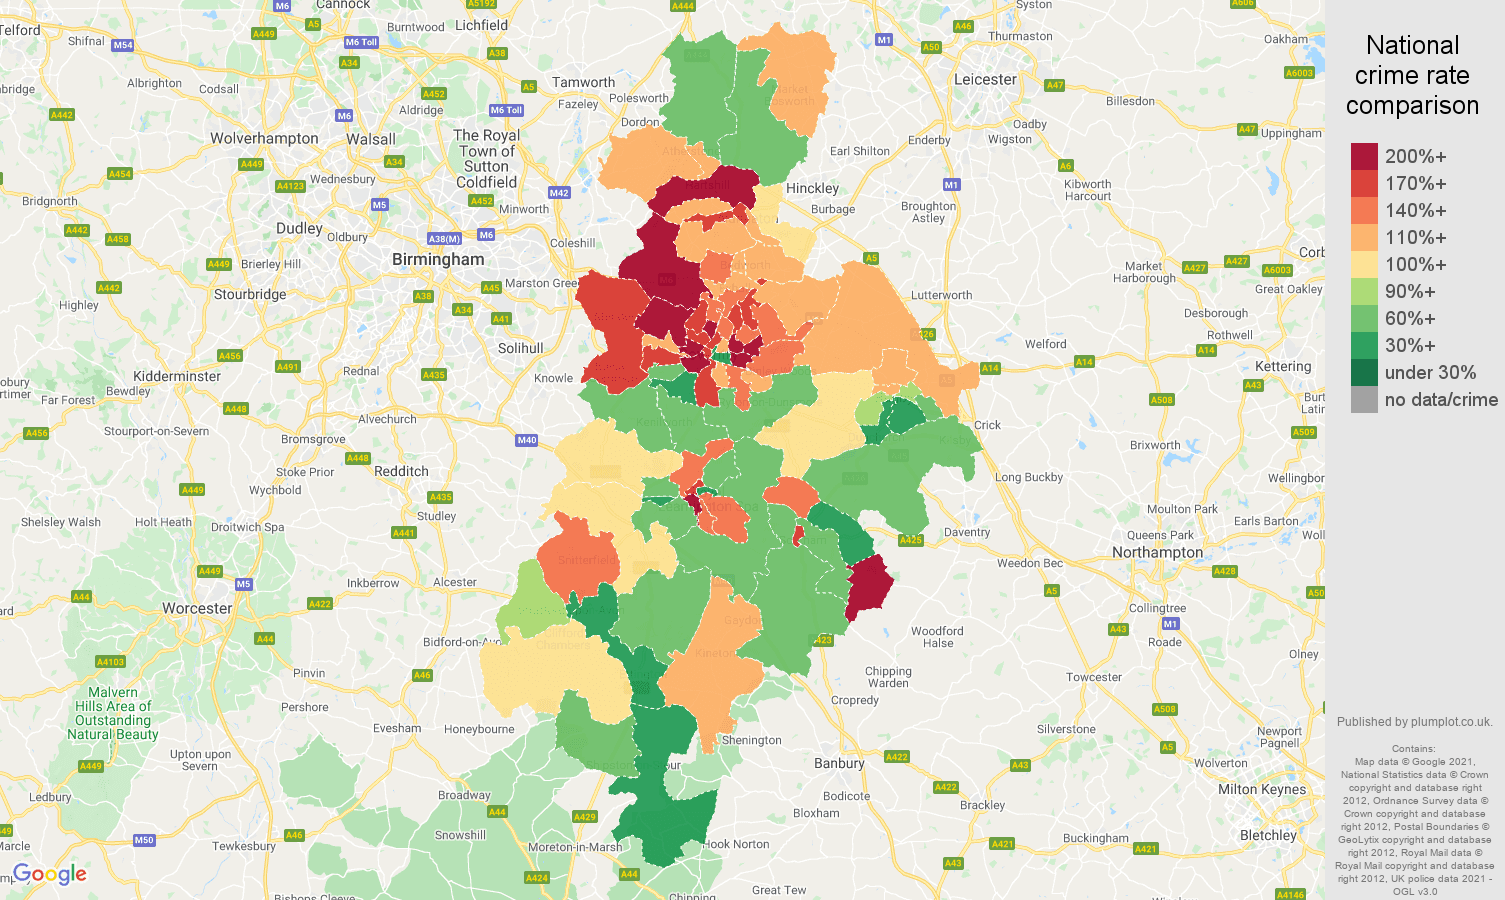 Coventry vehicle crime rate comparison map